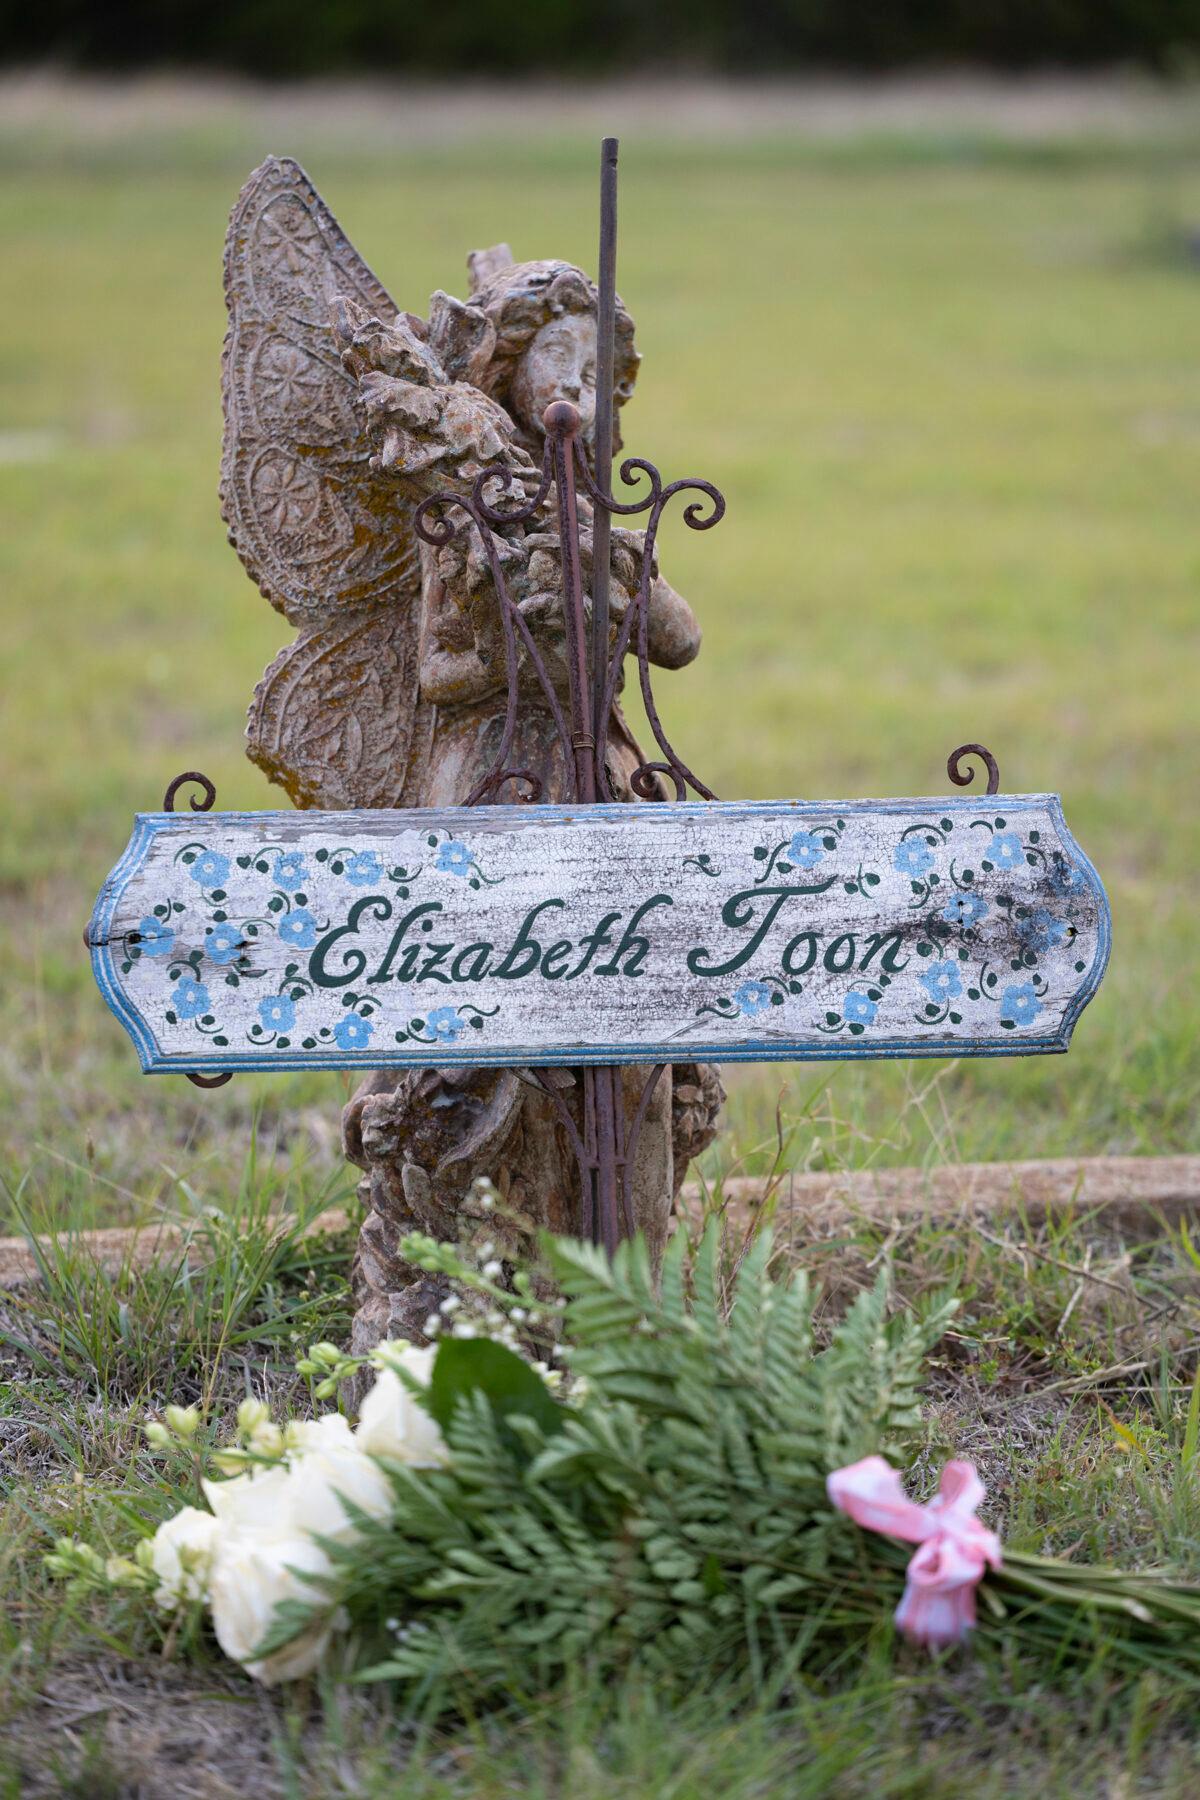 The final resting place of Sarah Elizabeth Toon at St. Olaf Cemetery near Cranfills Gap, Texas. (Dixie Dixon/For The Epoch Times)